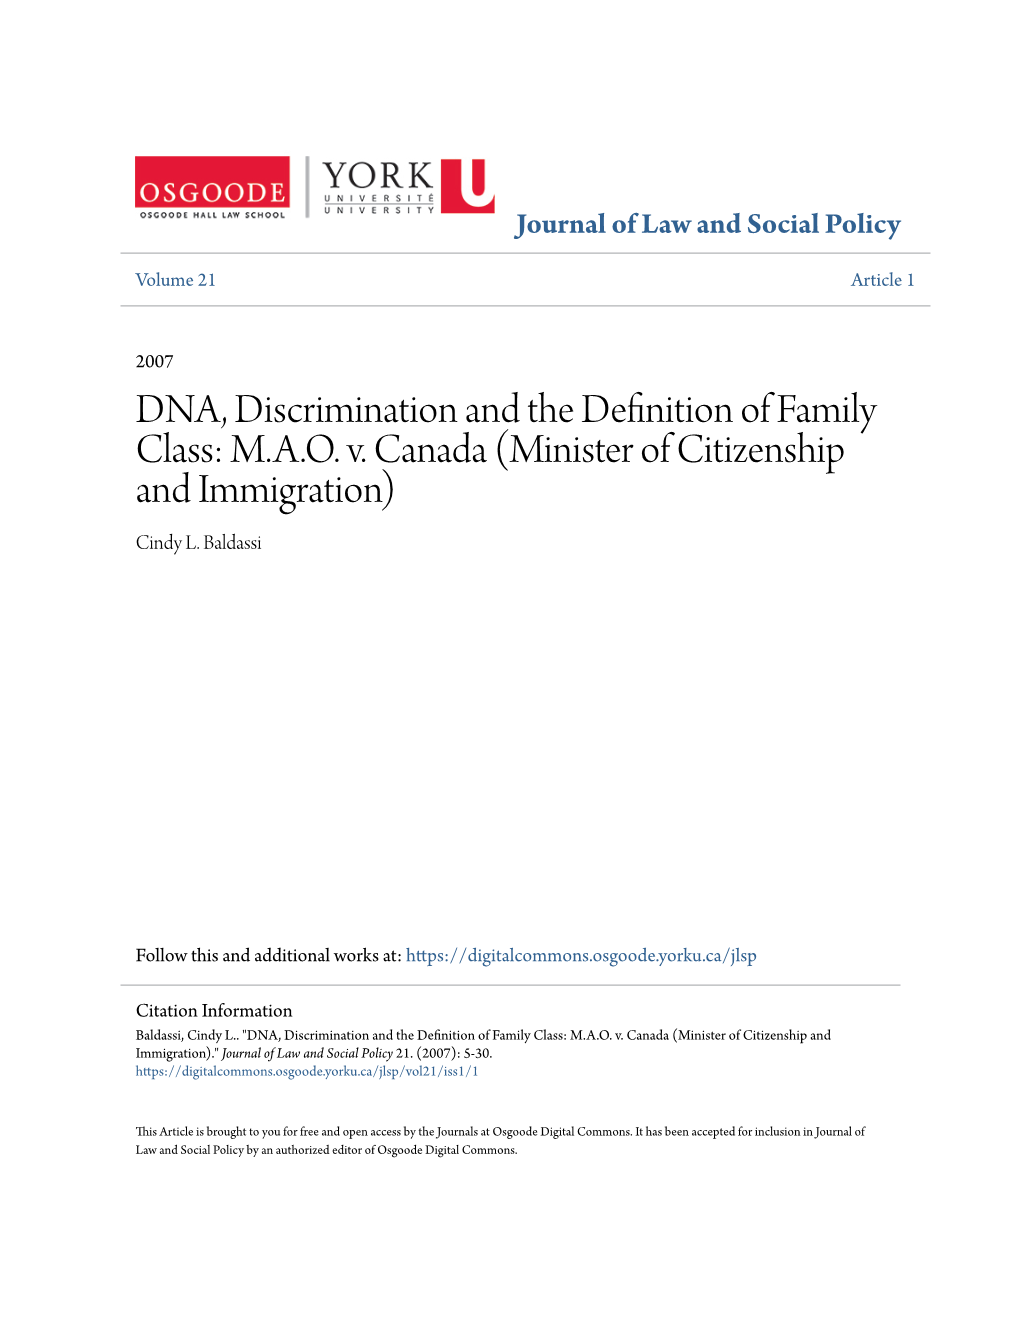 DNA, Discrimination and the Definition of Family Class: M.A.O. V. Canada (Minister of Citizenship and Immigration) Cindy L